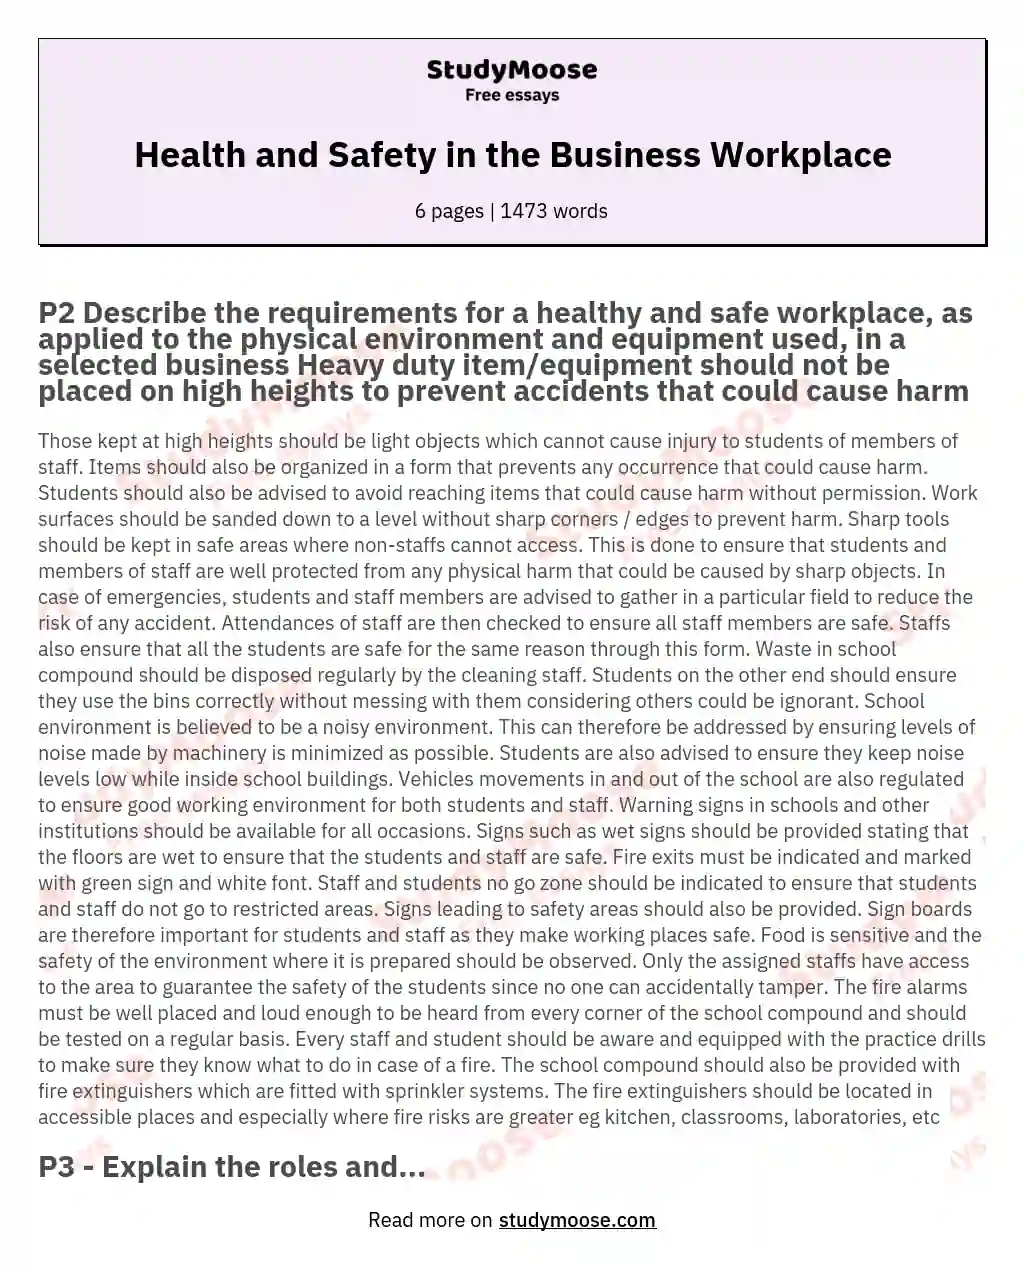 Health and Safety in the Business Workplace essay